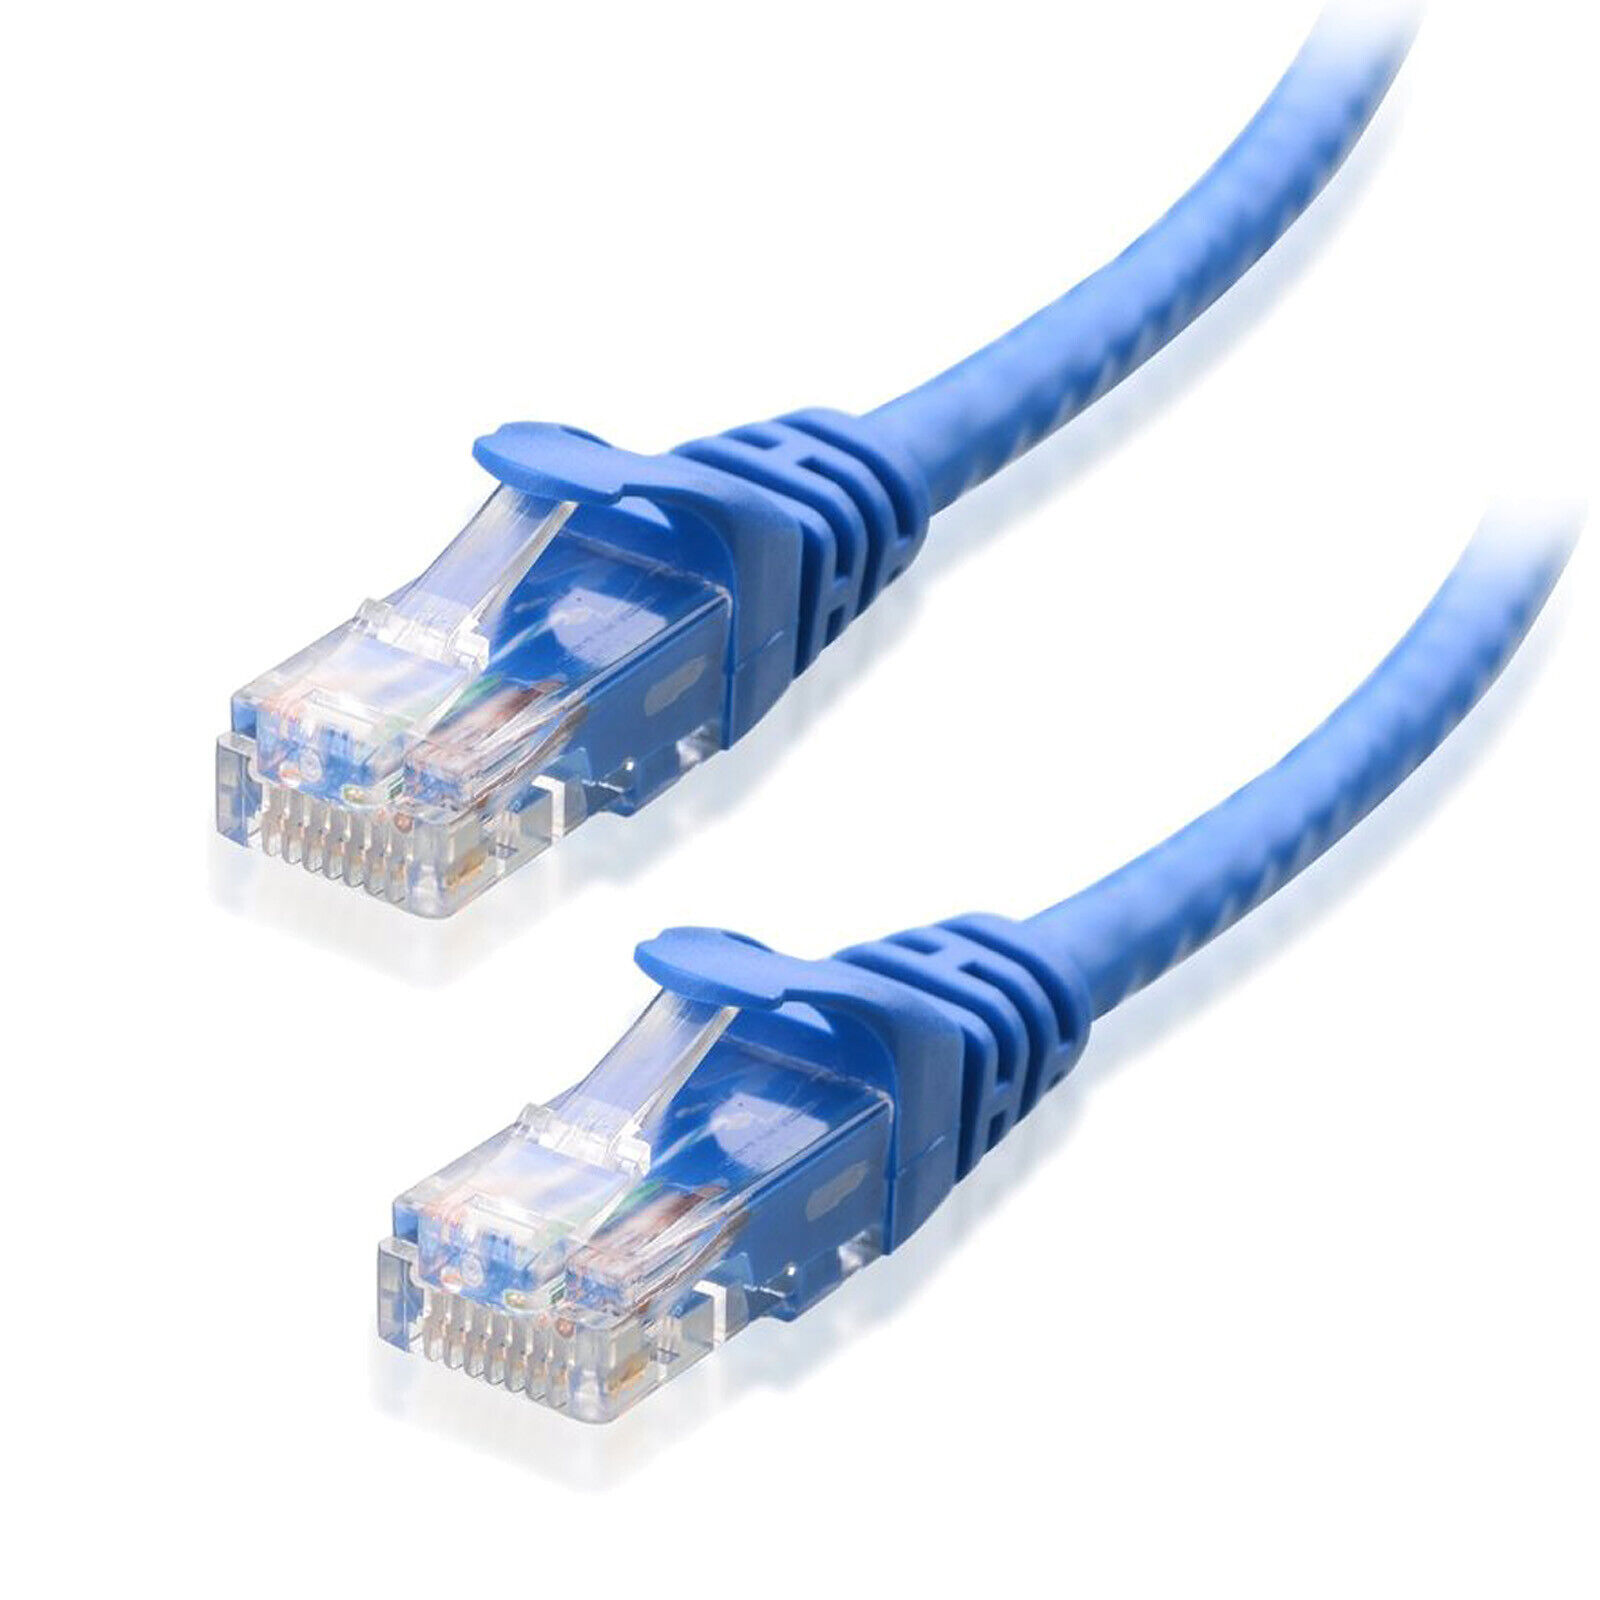 2023 Waterproof Durable Ethernet Netwok RJ45 Cable -Cat6/Cat5e 6FT to 100FT Lot